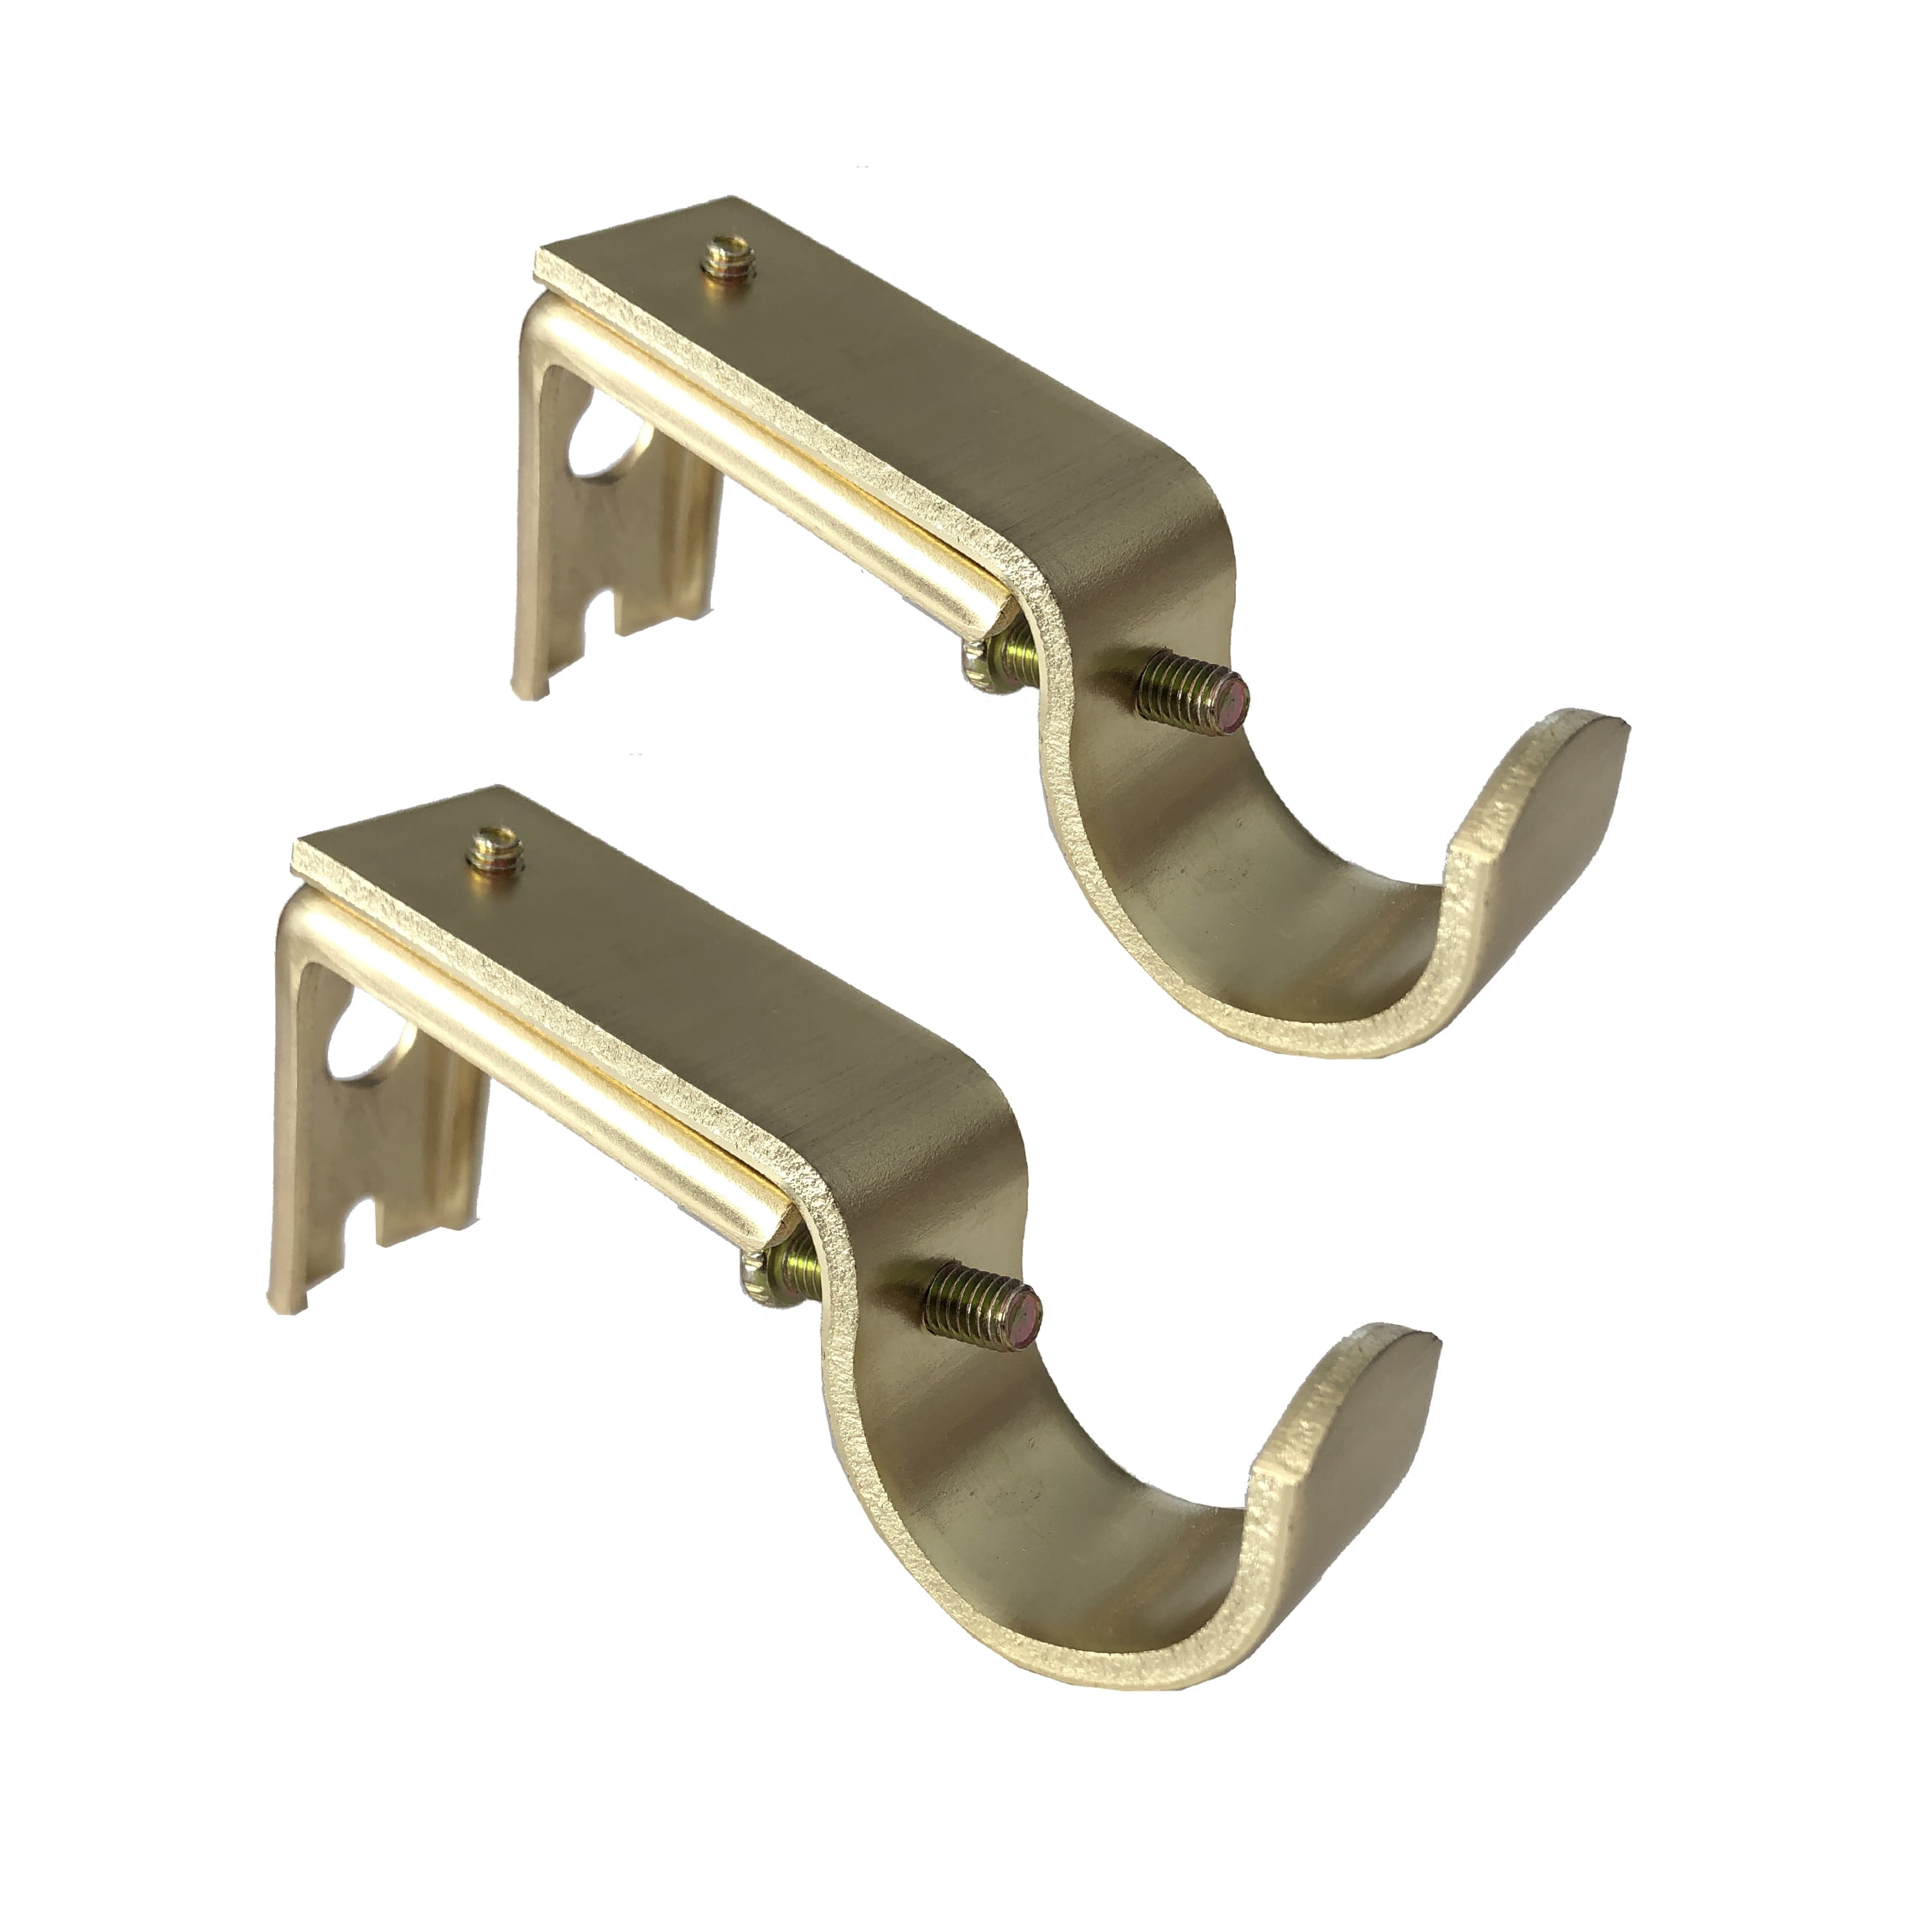 Curtain or closet clothes hanger rod mounting brackets 1-3/8" rod Brass Plated 